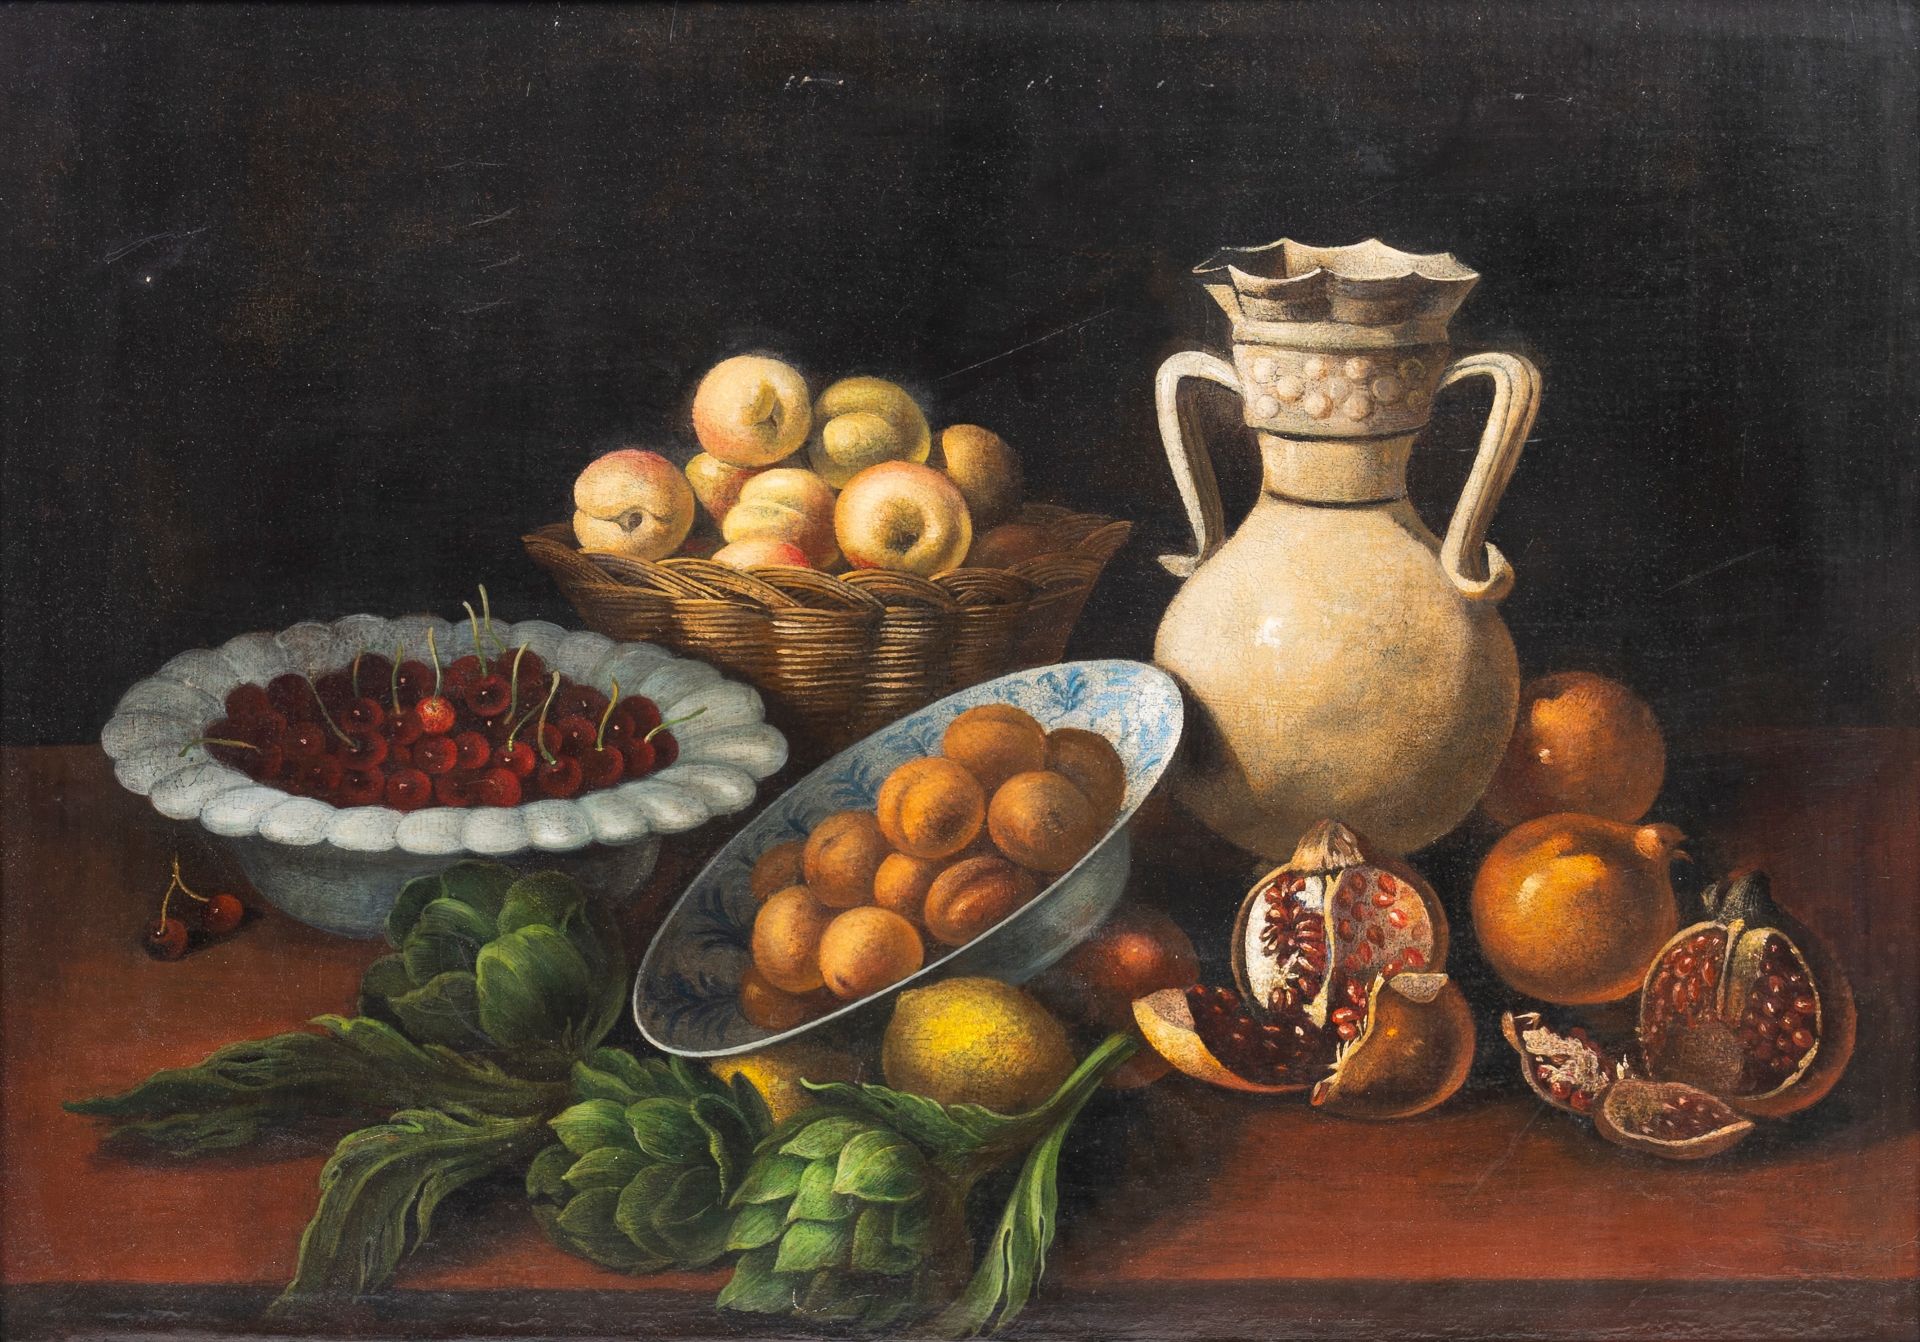 European school, in the manner of the Spanish school of the 17th C.: Still life with fruits and tabl